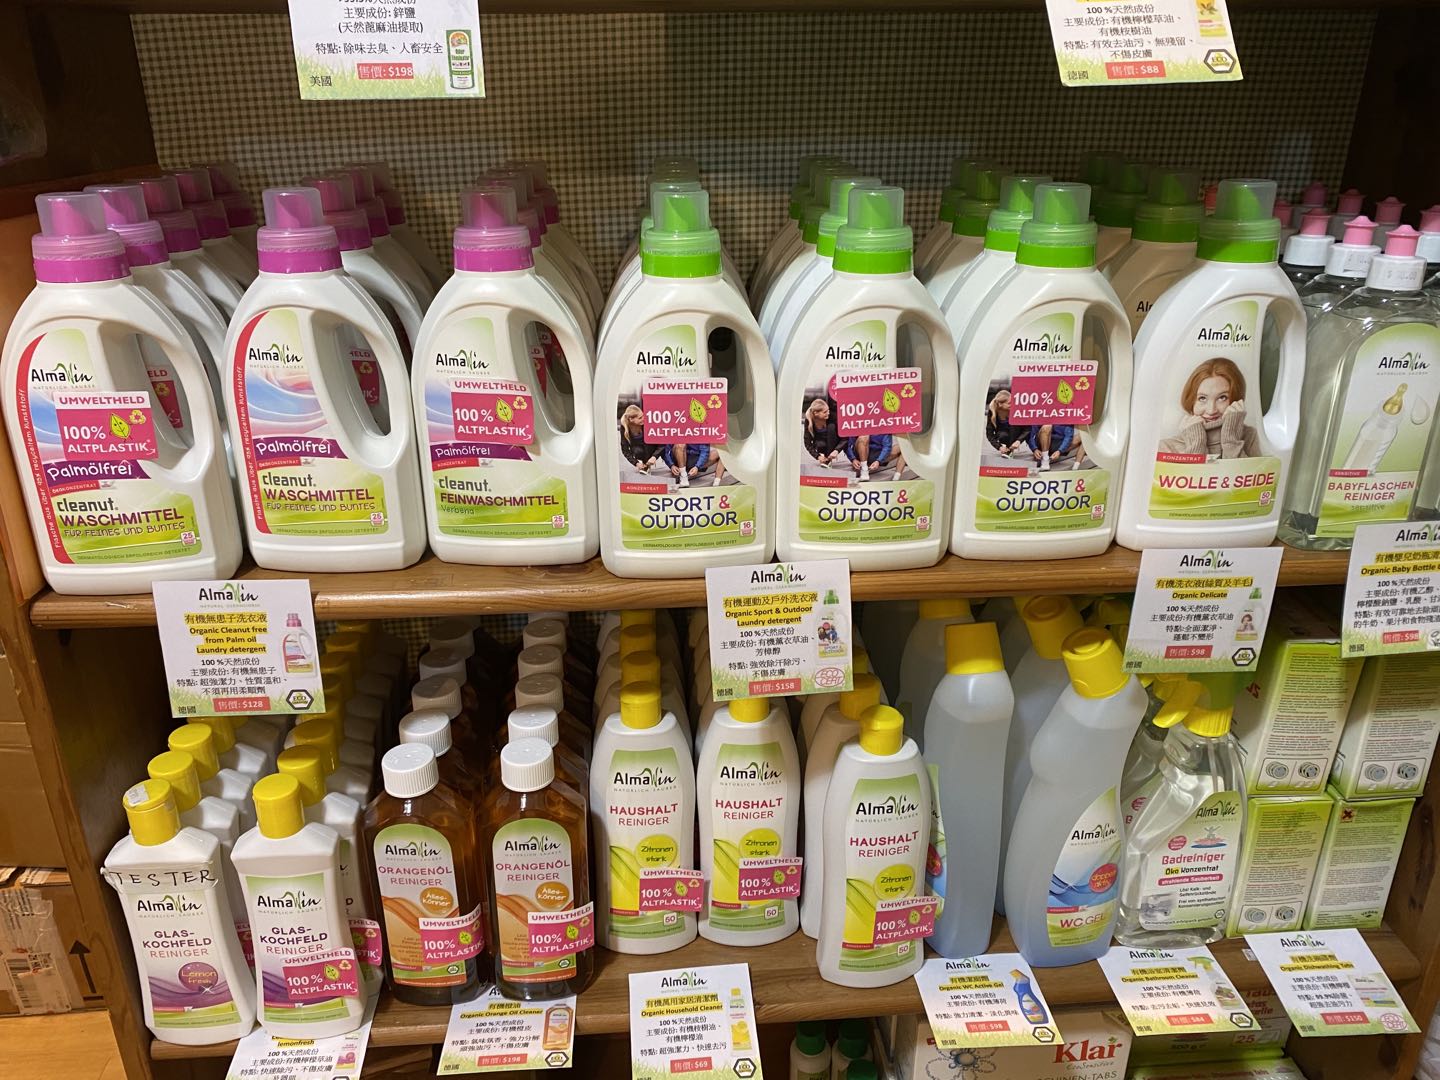 AlmaWin Organic Household Cleaning Products – Germany